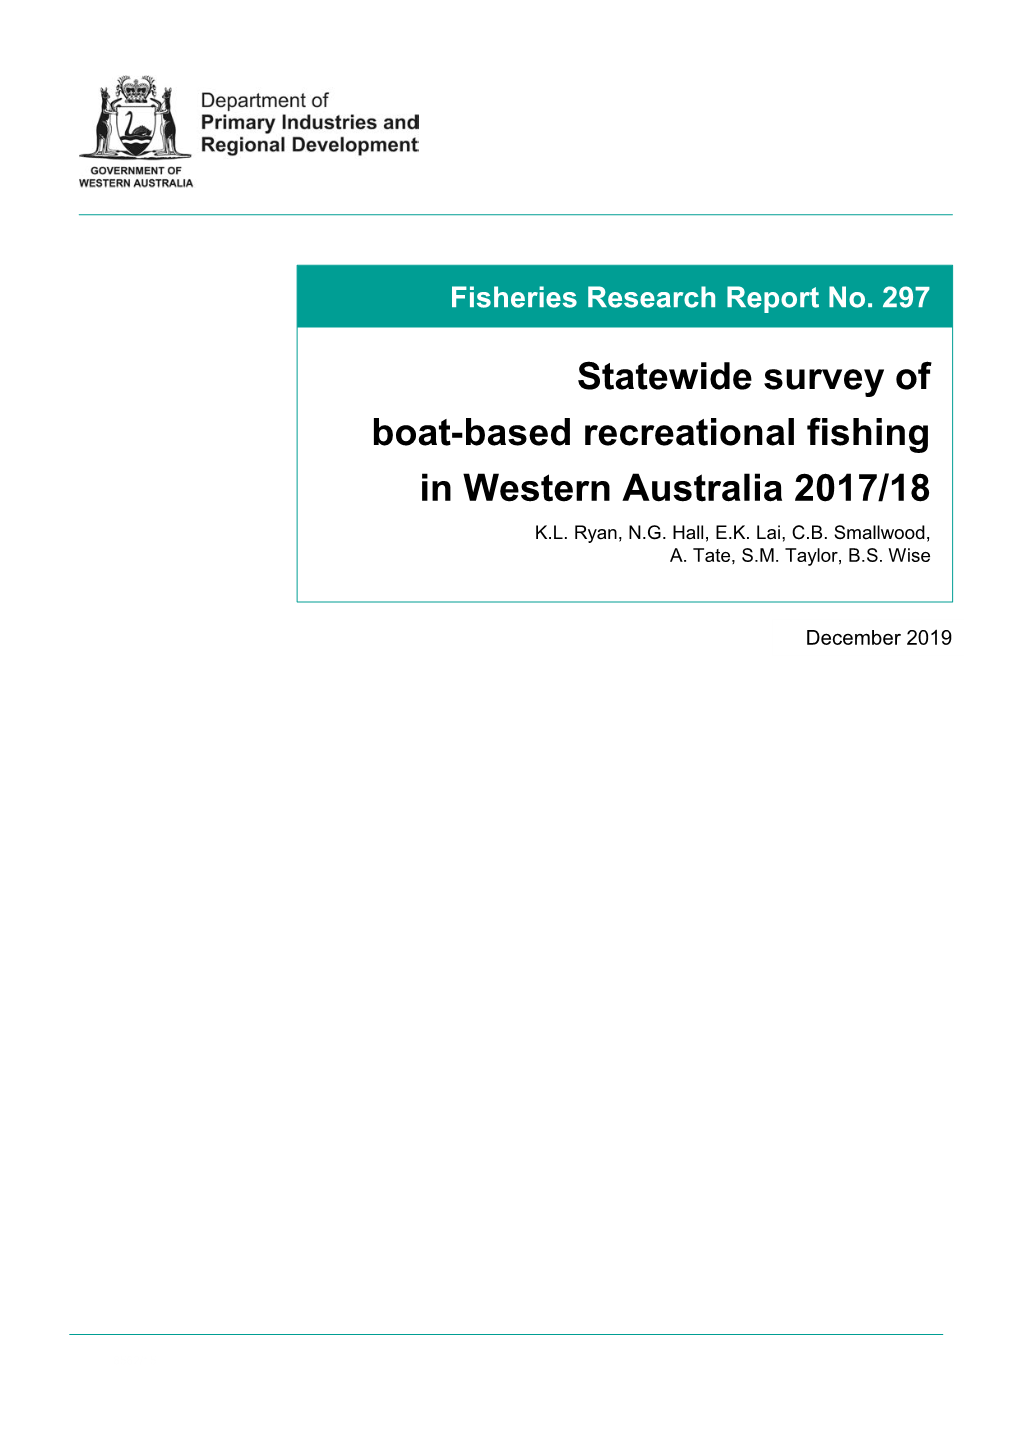 Statewide Survey of Boat-Based Recreational Fishing in Western Australia 2017/18